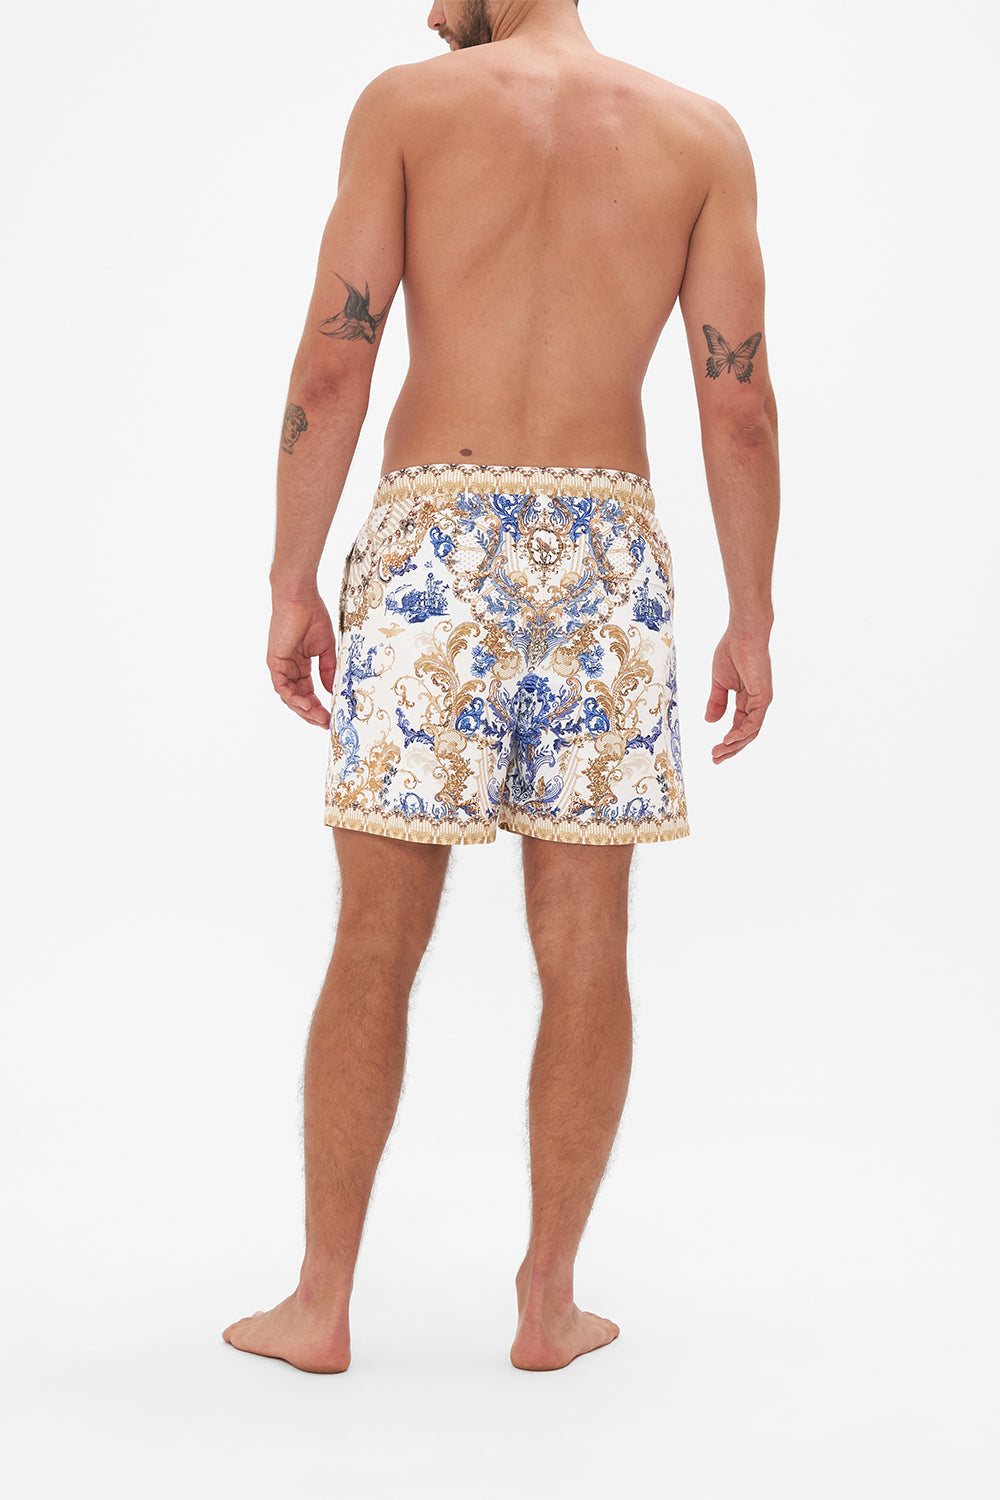 Back view of model wearing Hotel Franks by CAMILLA mens white boardshorts in Soul Searching print